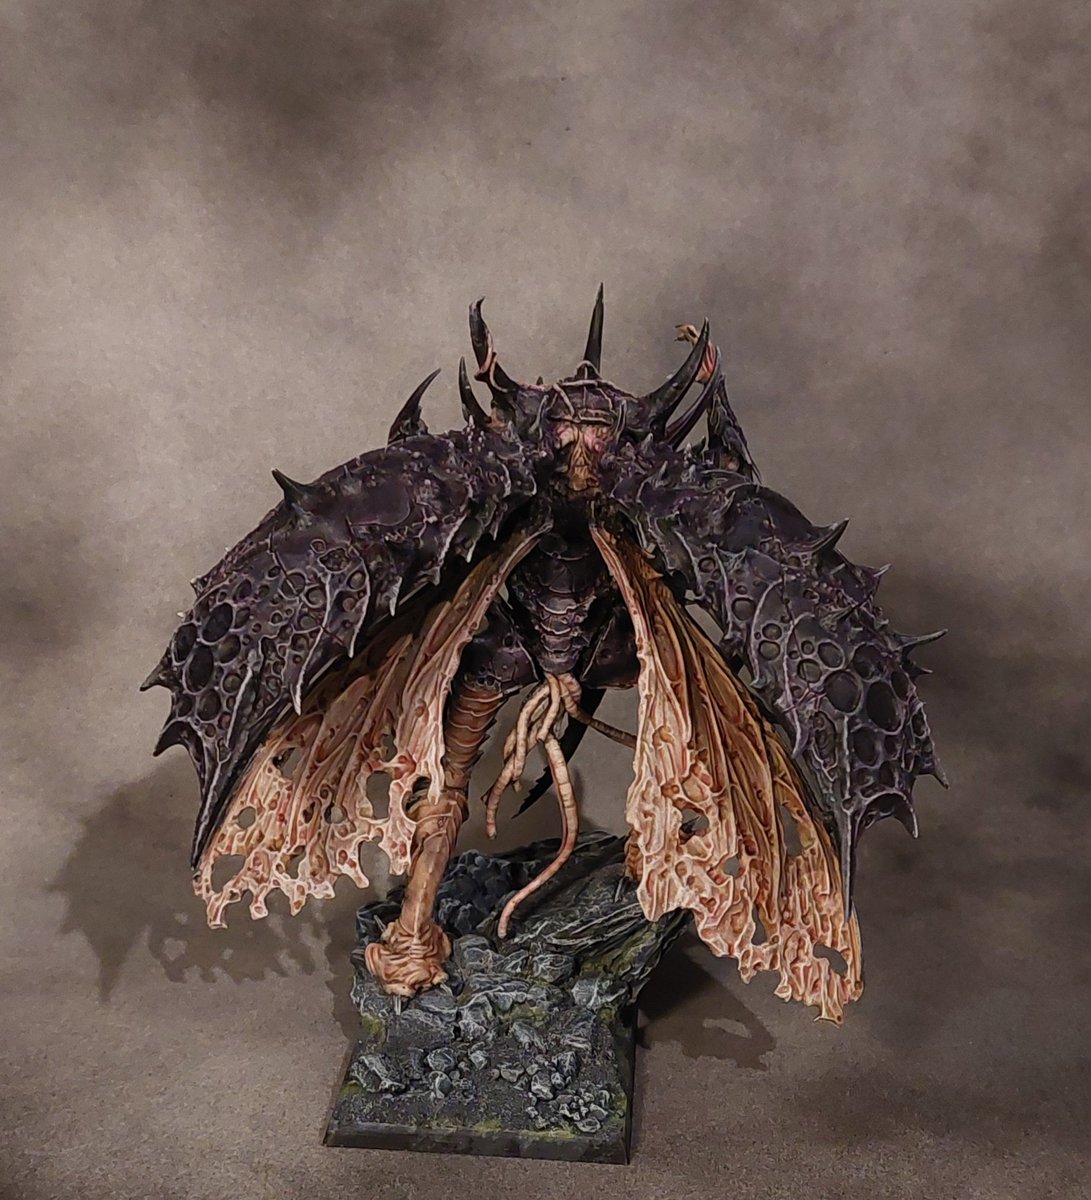 Getting closer of finishing my #CreatureCaster Lord of Sorrows and will be using it as my Sentinel with Strixian Spirit. #The_9th_Age #t9a #the9thagefinland #the9thage #Warmongers #warhammer #WarGames #miniatures #miniaturepainting #minipainting #miniature #tabletopgaming #demon